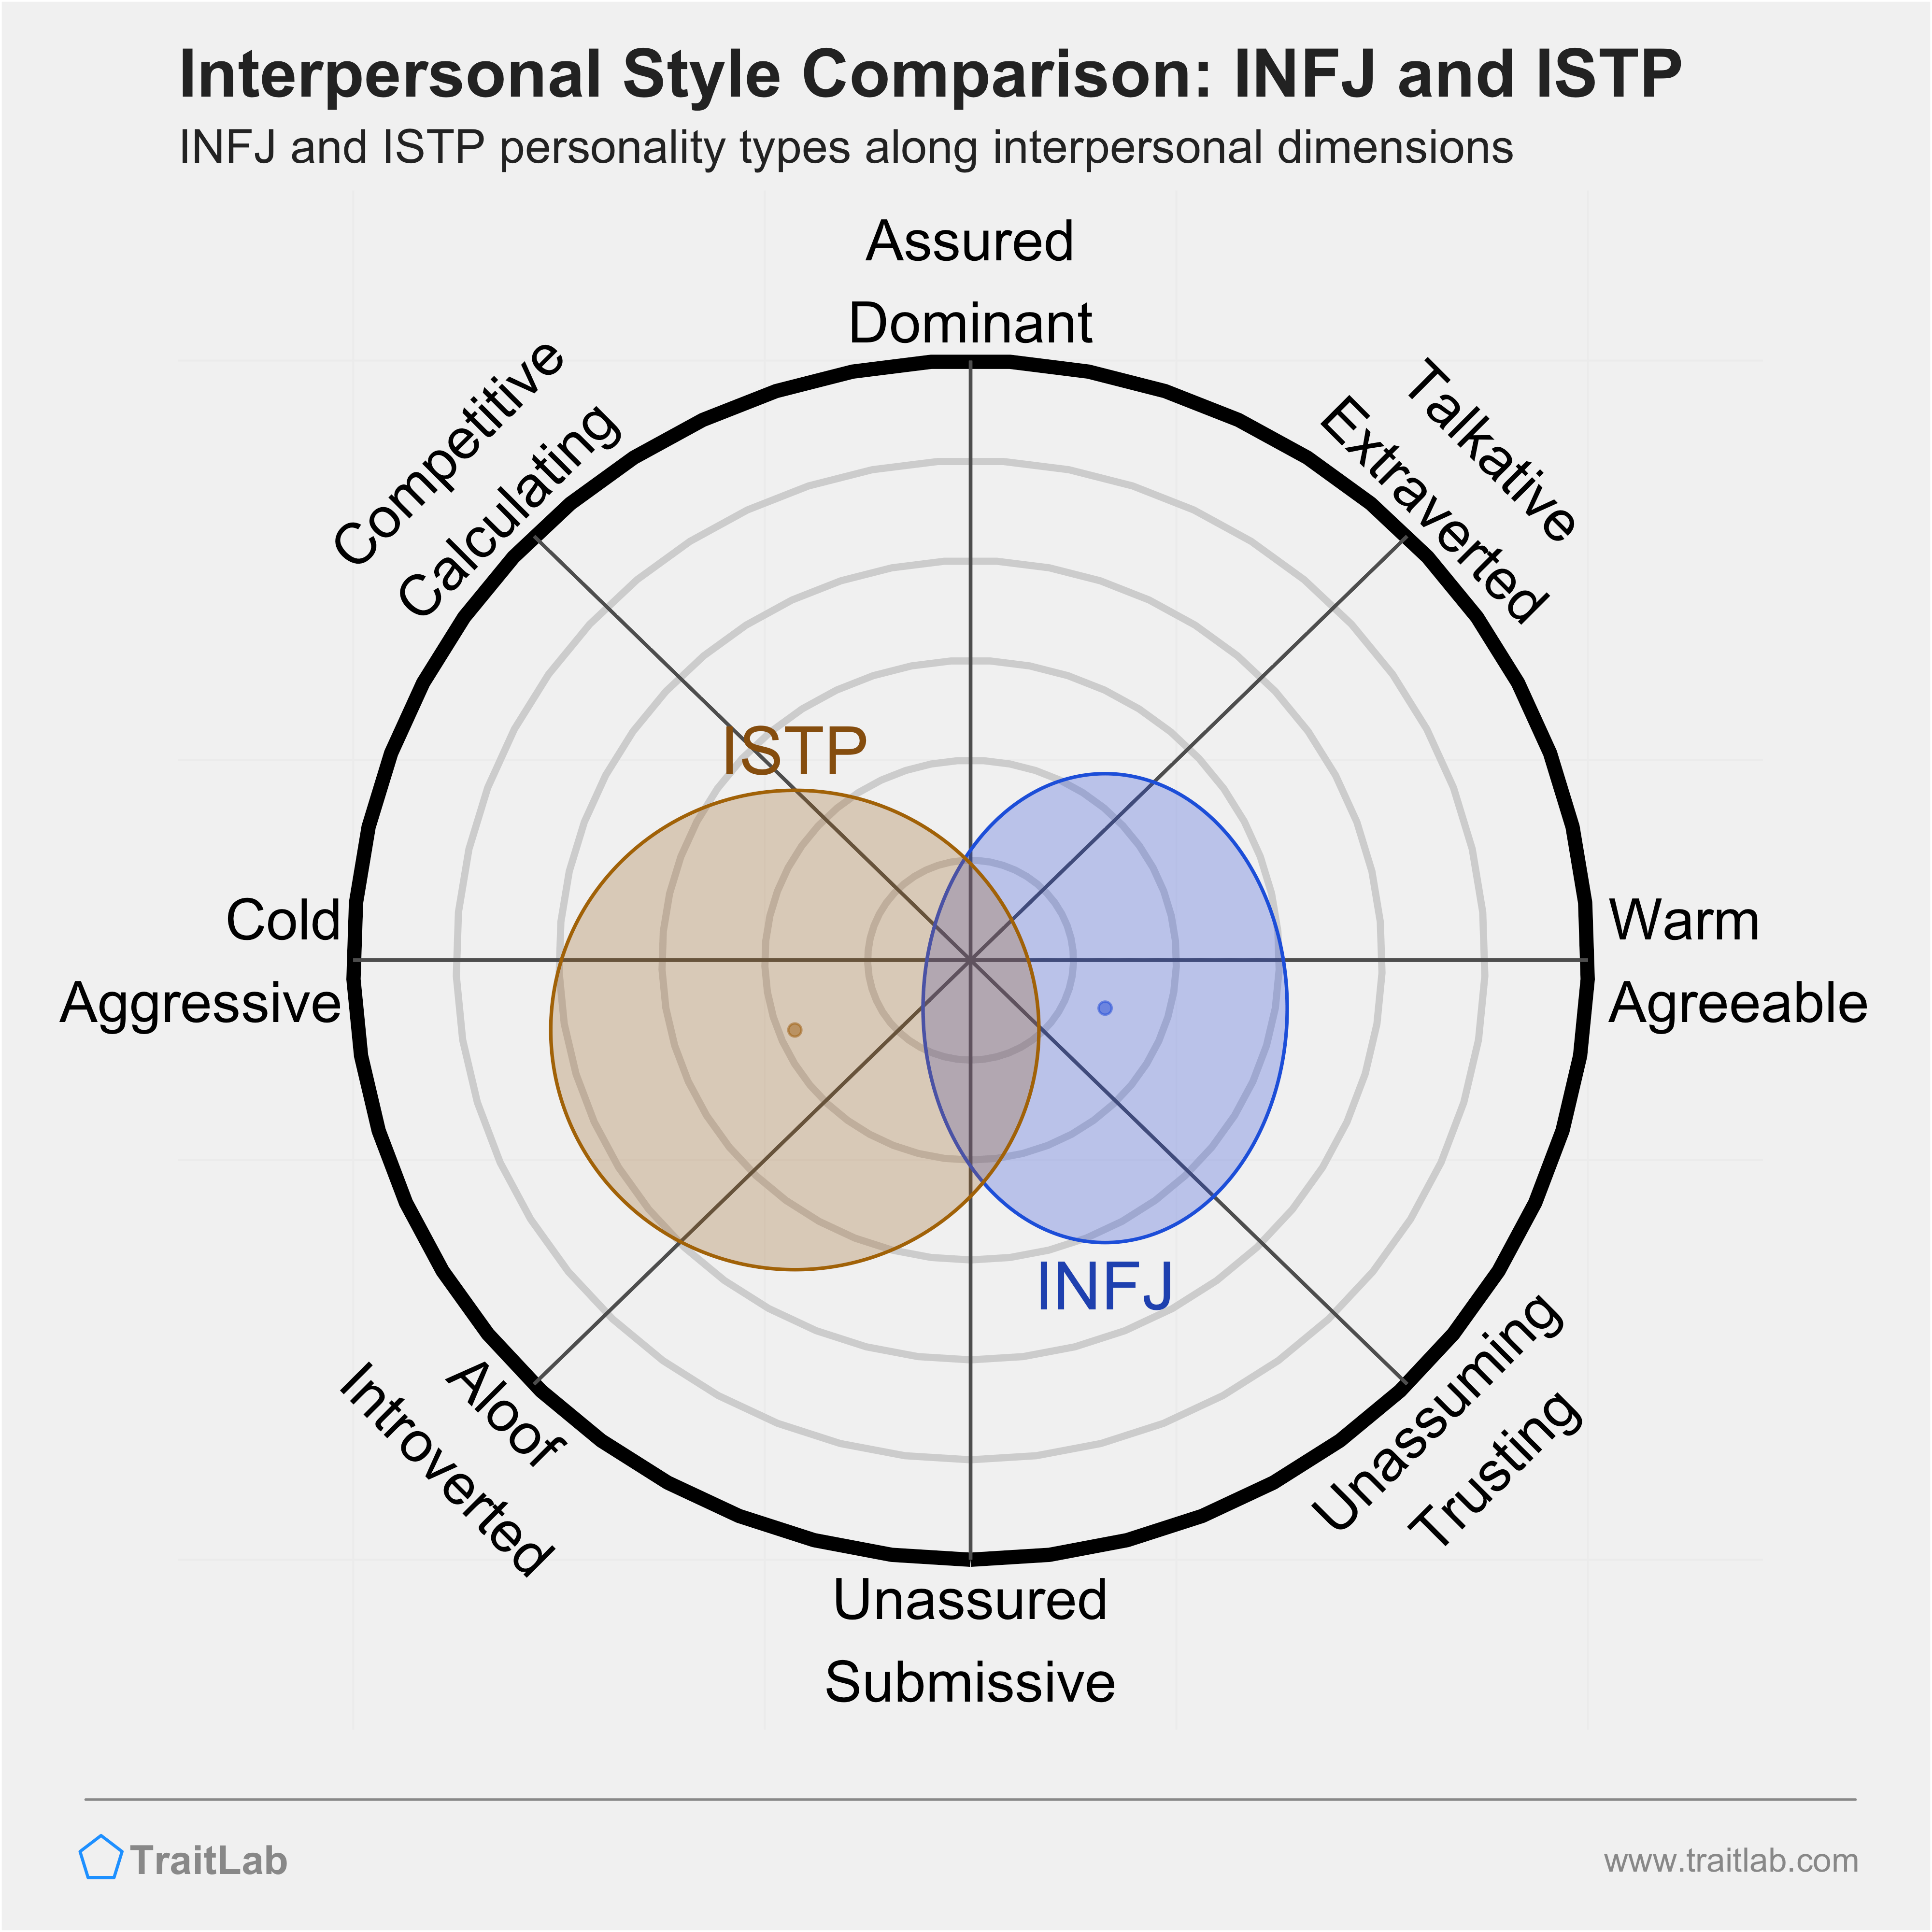 INFJ and ISTP comparison across interpersonal dimensions